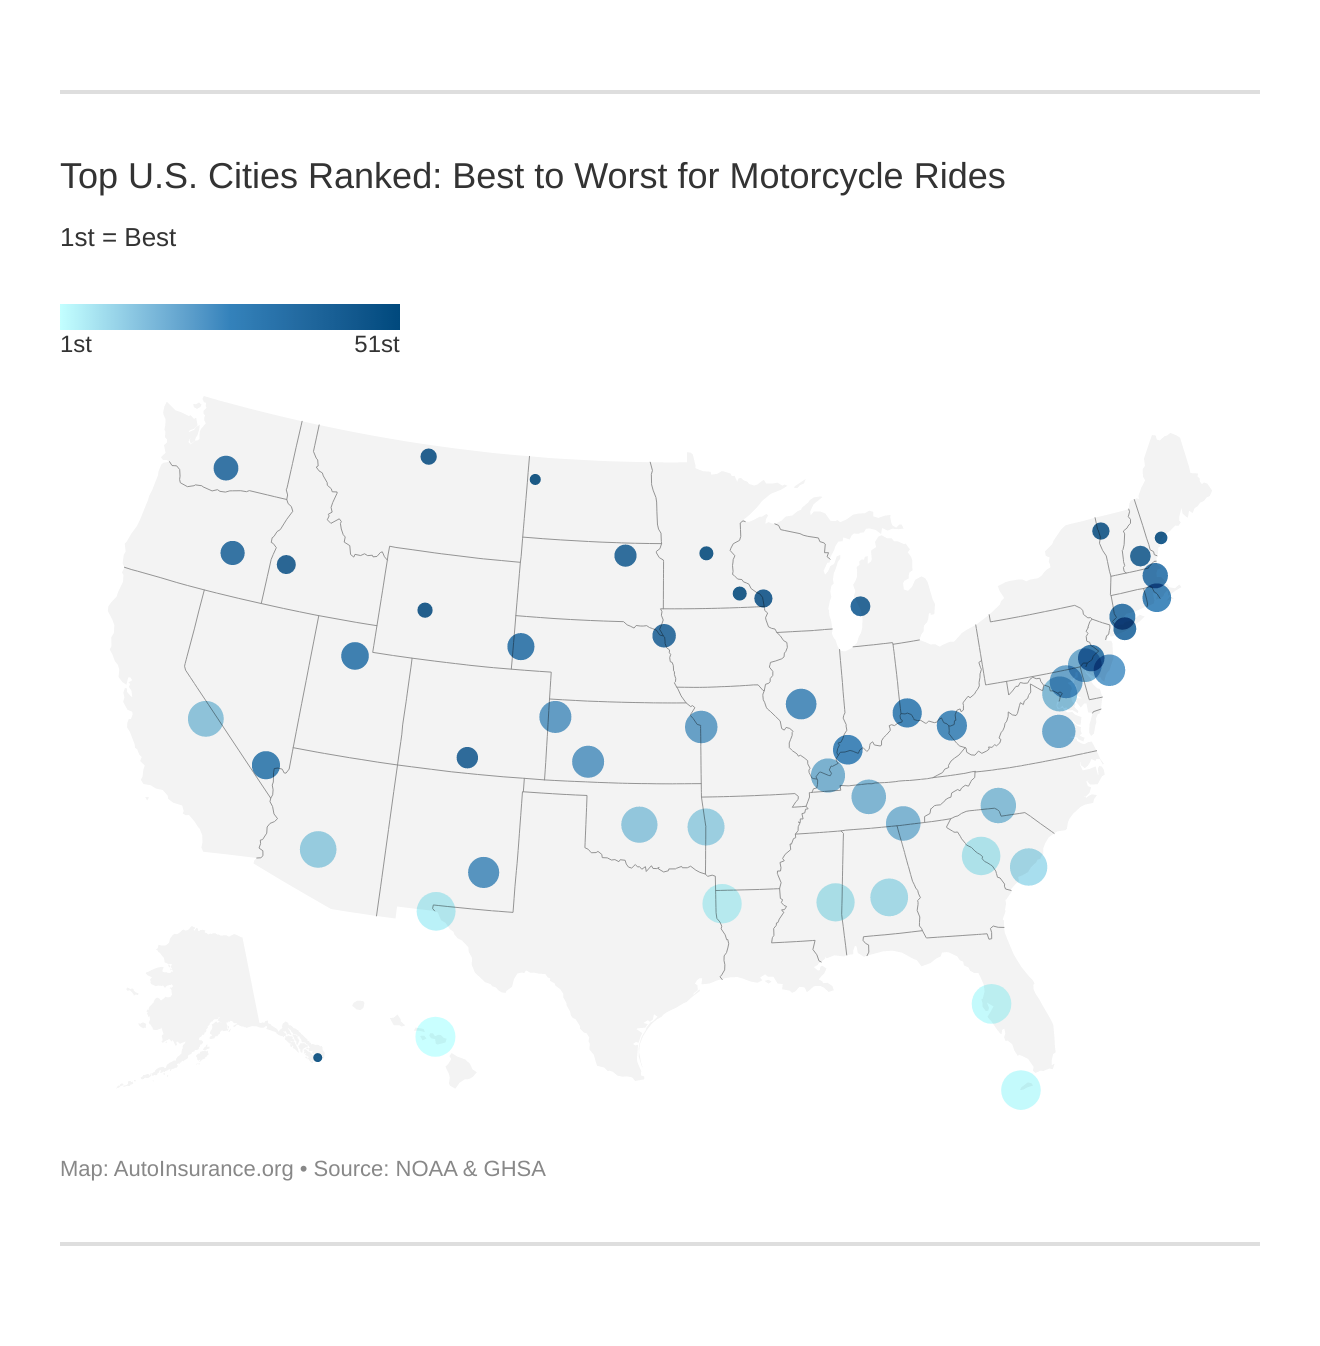 Top U.S. Cities Ranked: Best to Worst for Motorcycle Rides